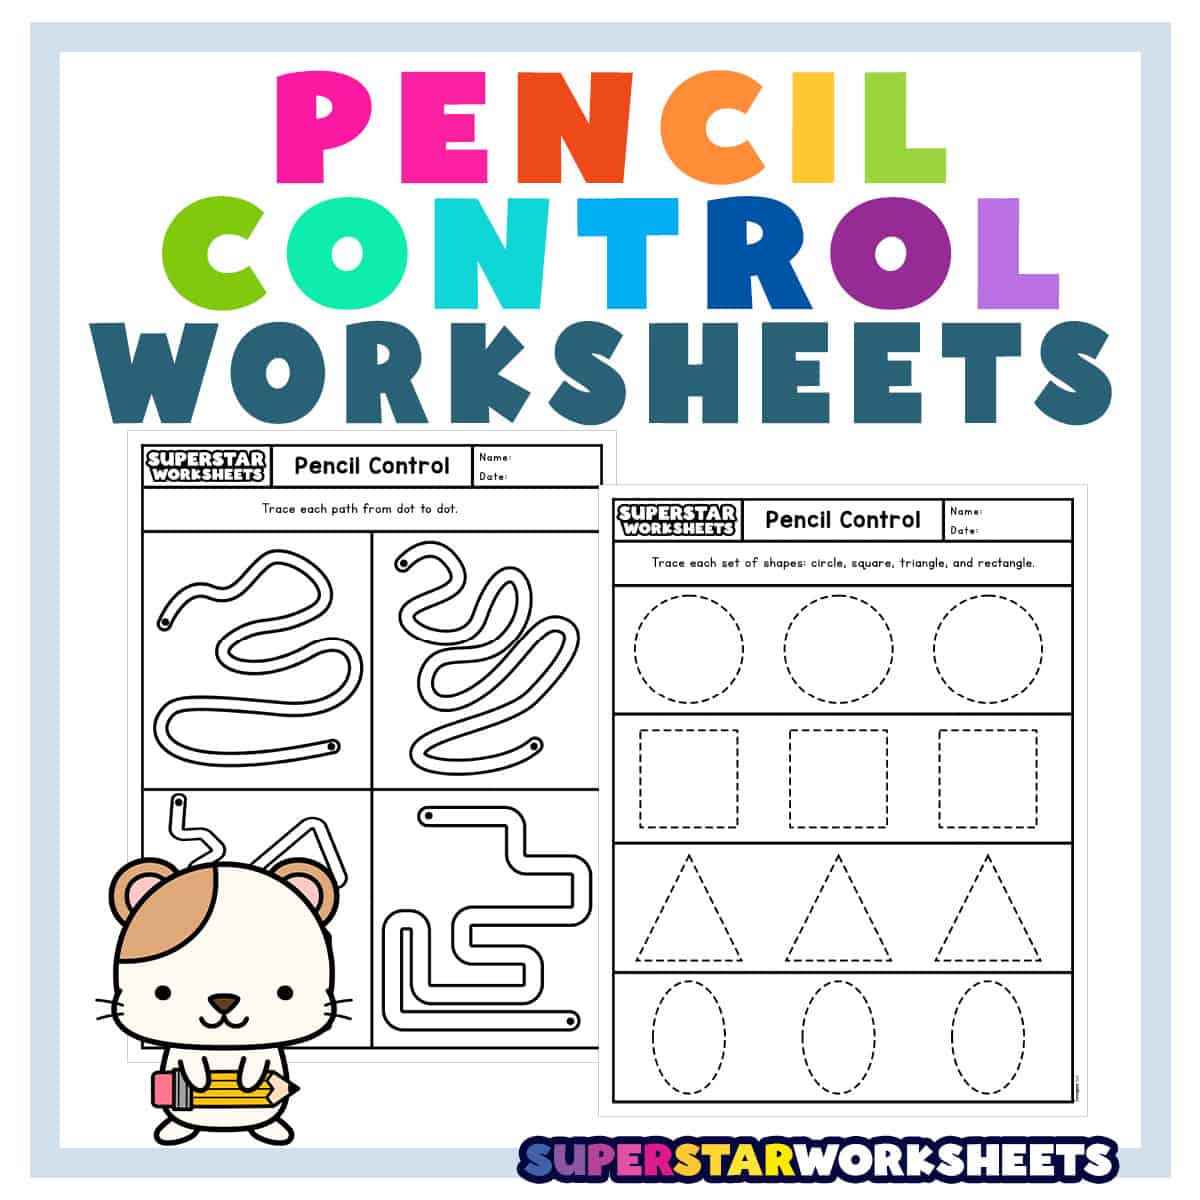 50 sheets tracing paper. Use tracing paper to trace images from a coloring  book or children's book. A fun way to trace lines, this activity helps  strengthen fine motor control and pencil